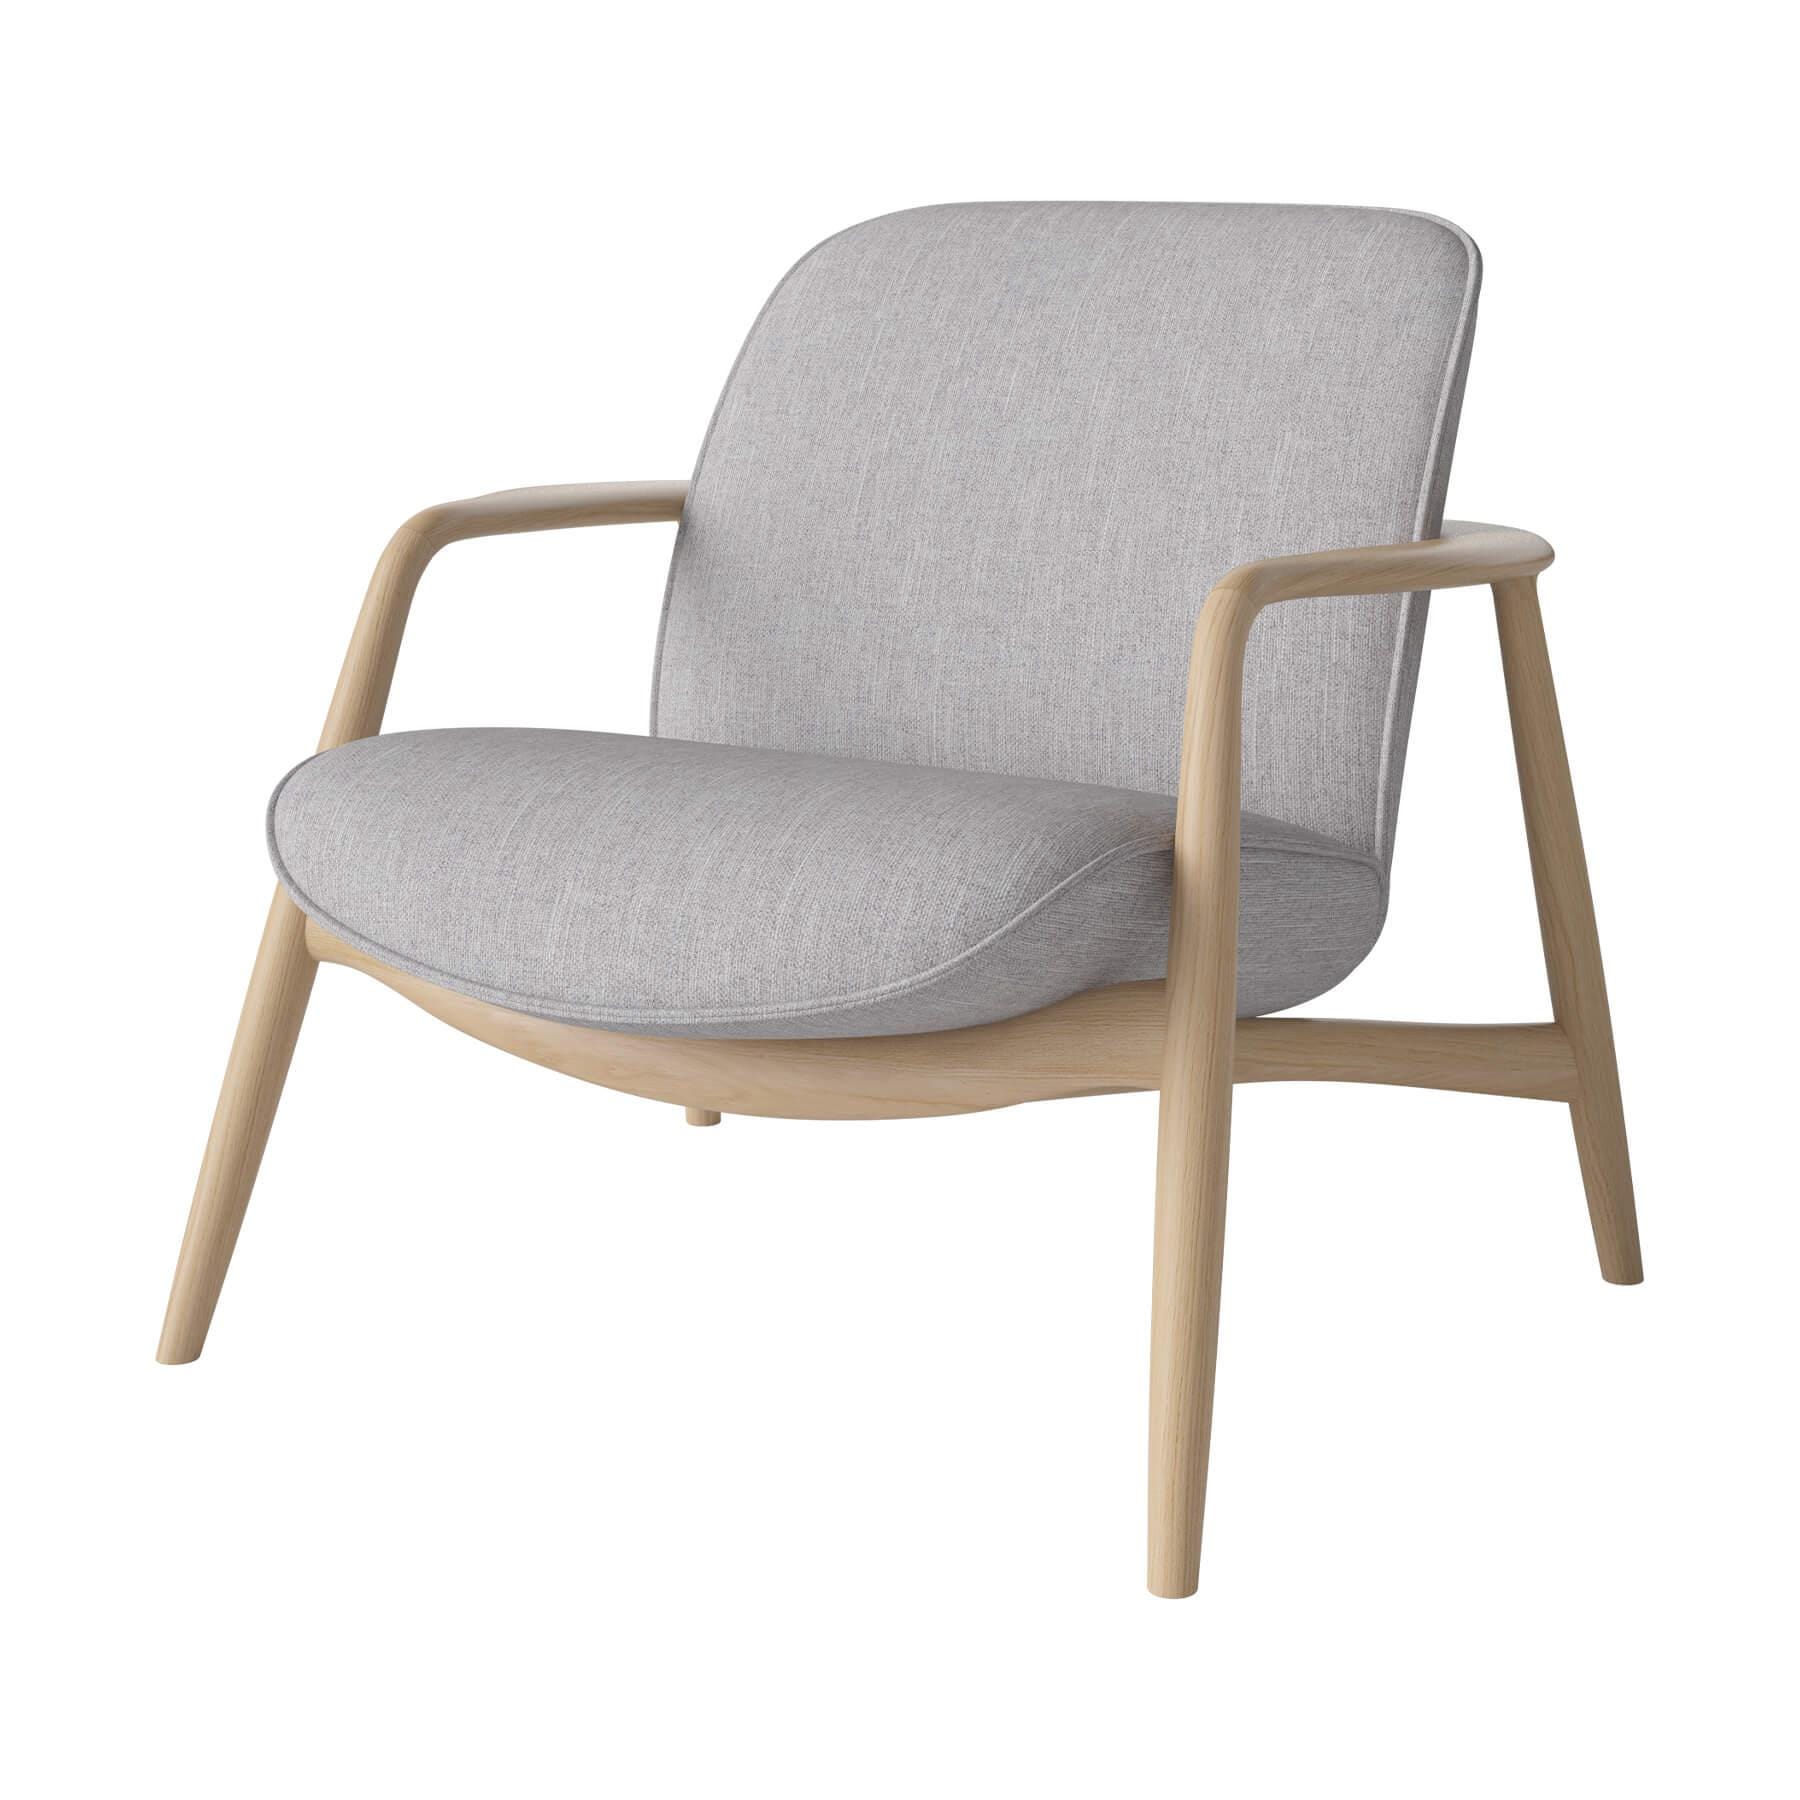 Bolia Bowie Armchair White Oiled Oak Baize Light Grey Designer Furniture From Holloways Of Ludlow